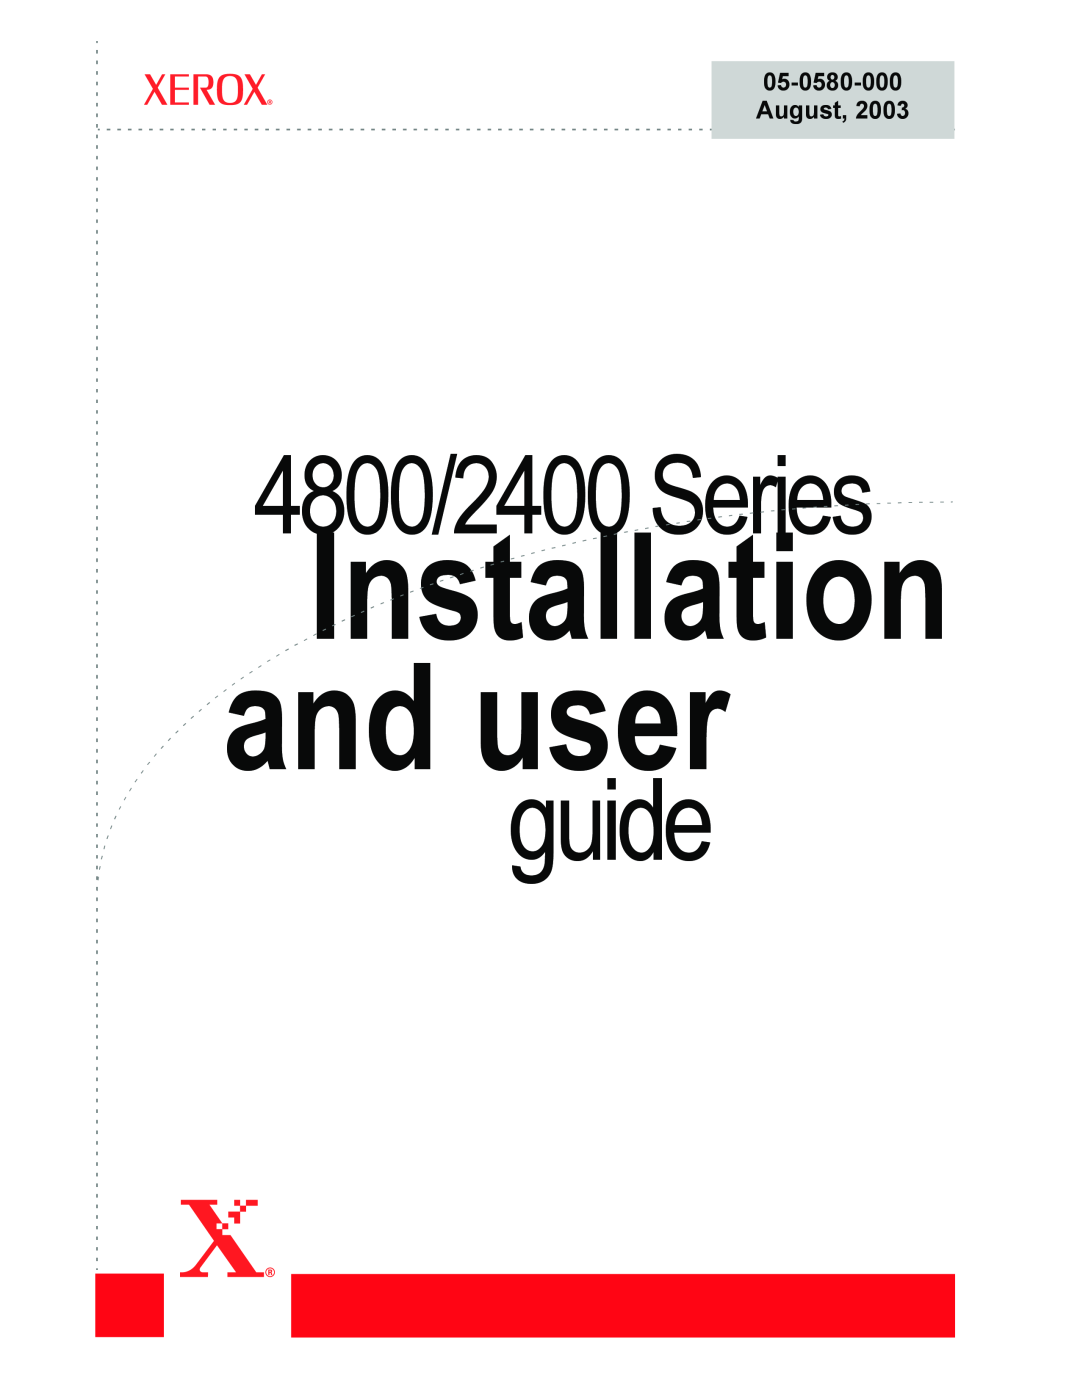 Xerox manual Installation and user, guide, 4800/2400 Series, August 